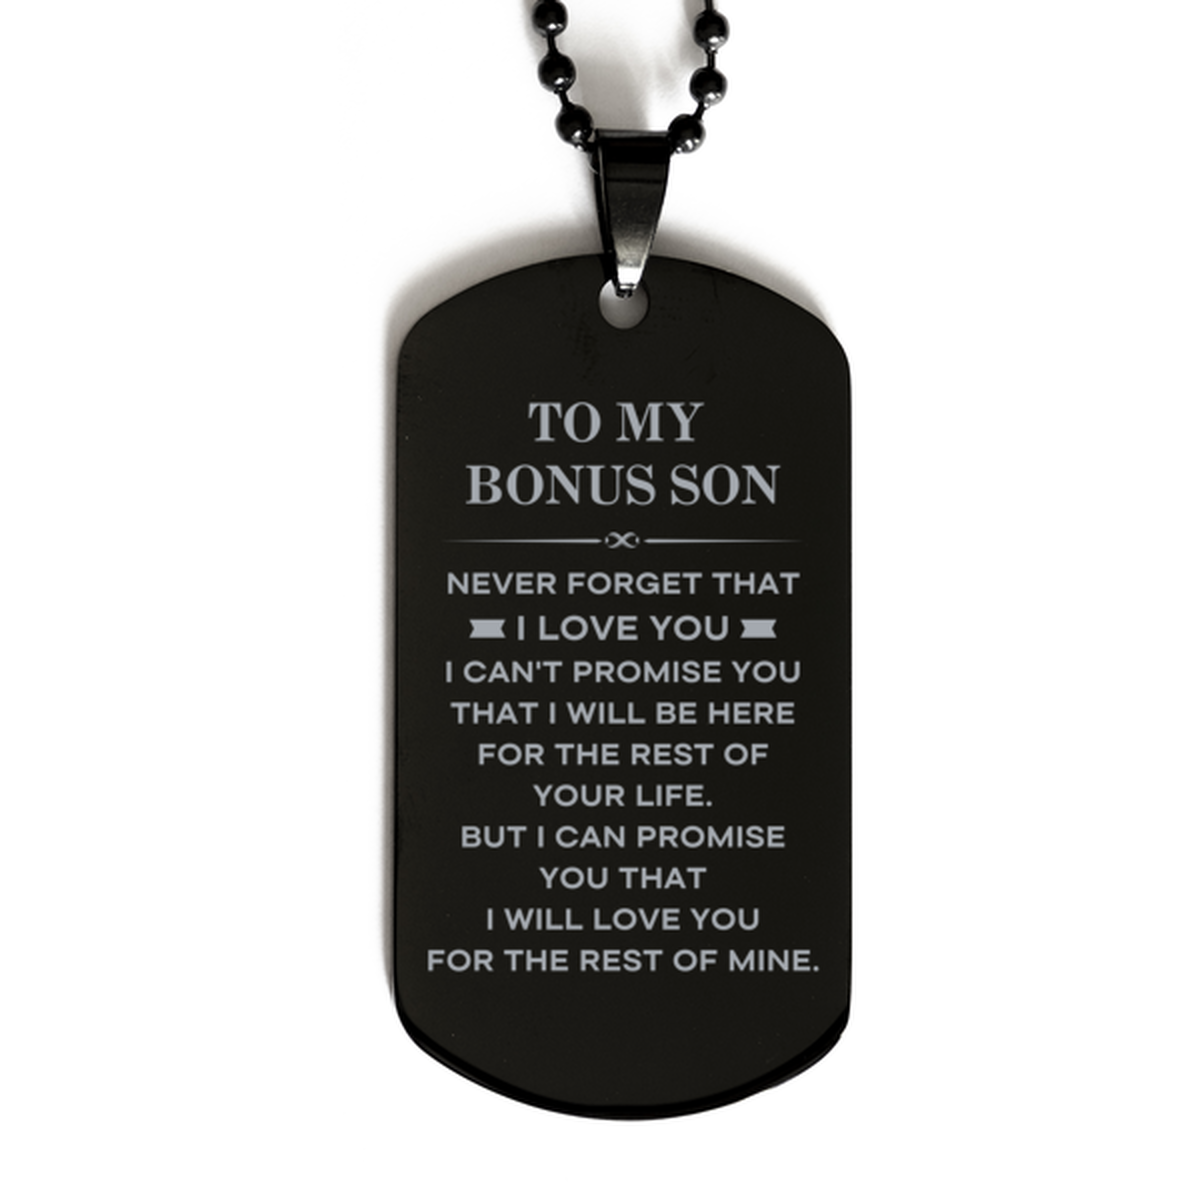 To My Bonus Son Gifts, I will love you for the rest of mine, Love Bonus Son Dog Tag Necklace, Birthday Christmas Unique Black Dog Tag For Bonus Son